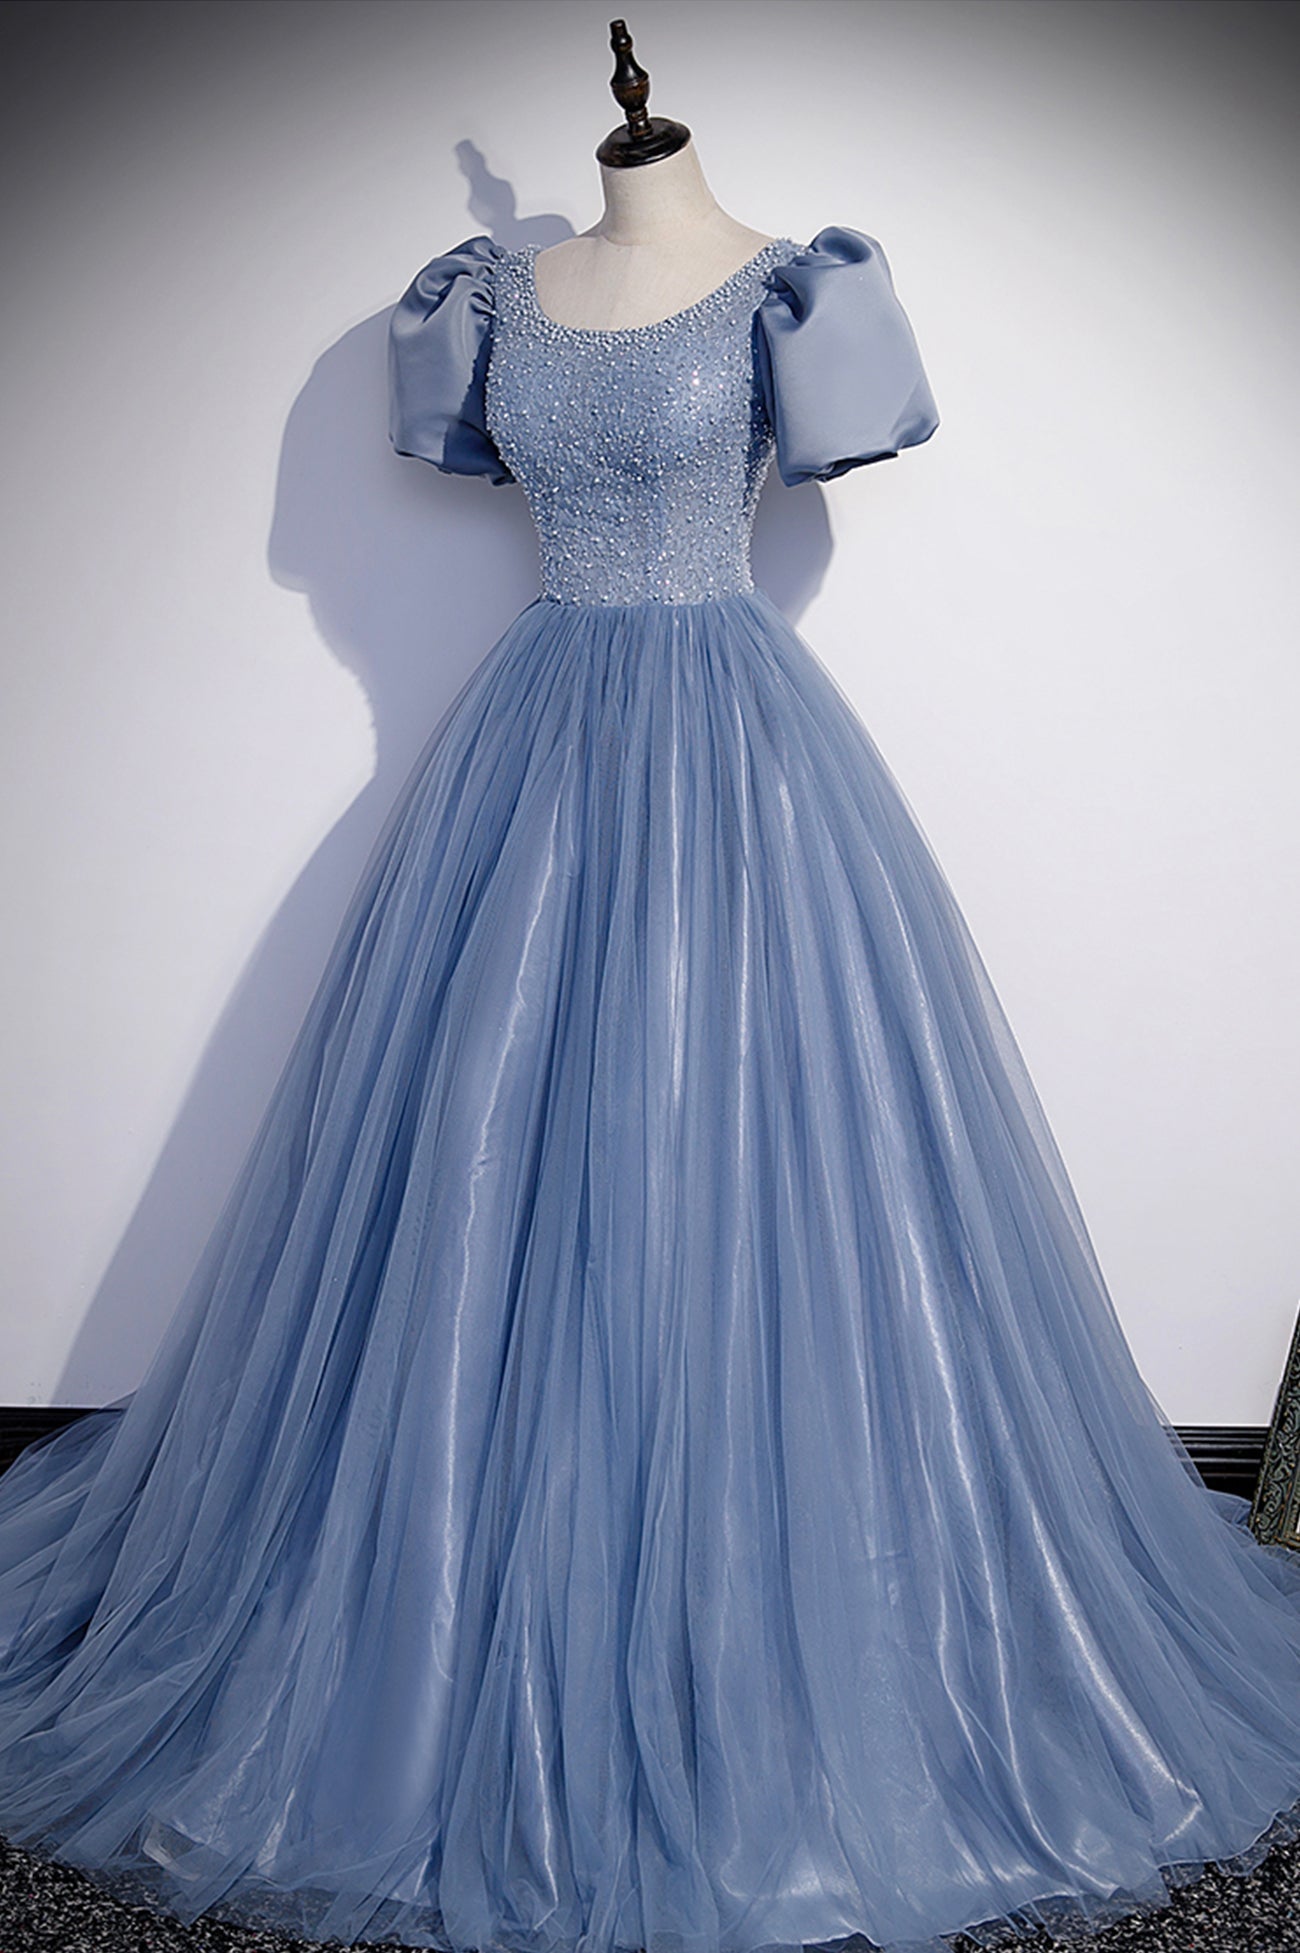 Prom Dresses For Curvy Figures, Blue Scoop Tulle Long Prom Dress, A-Line Short Sleeve Formal Dress